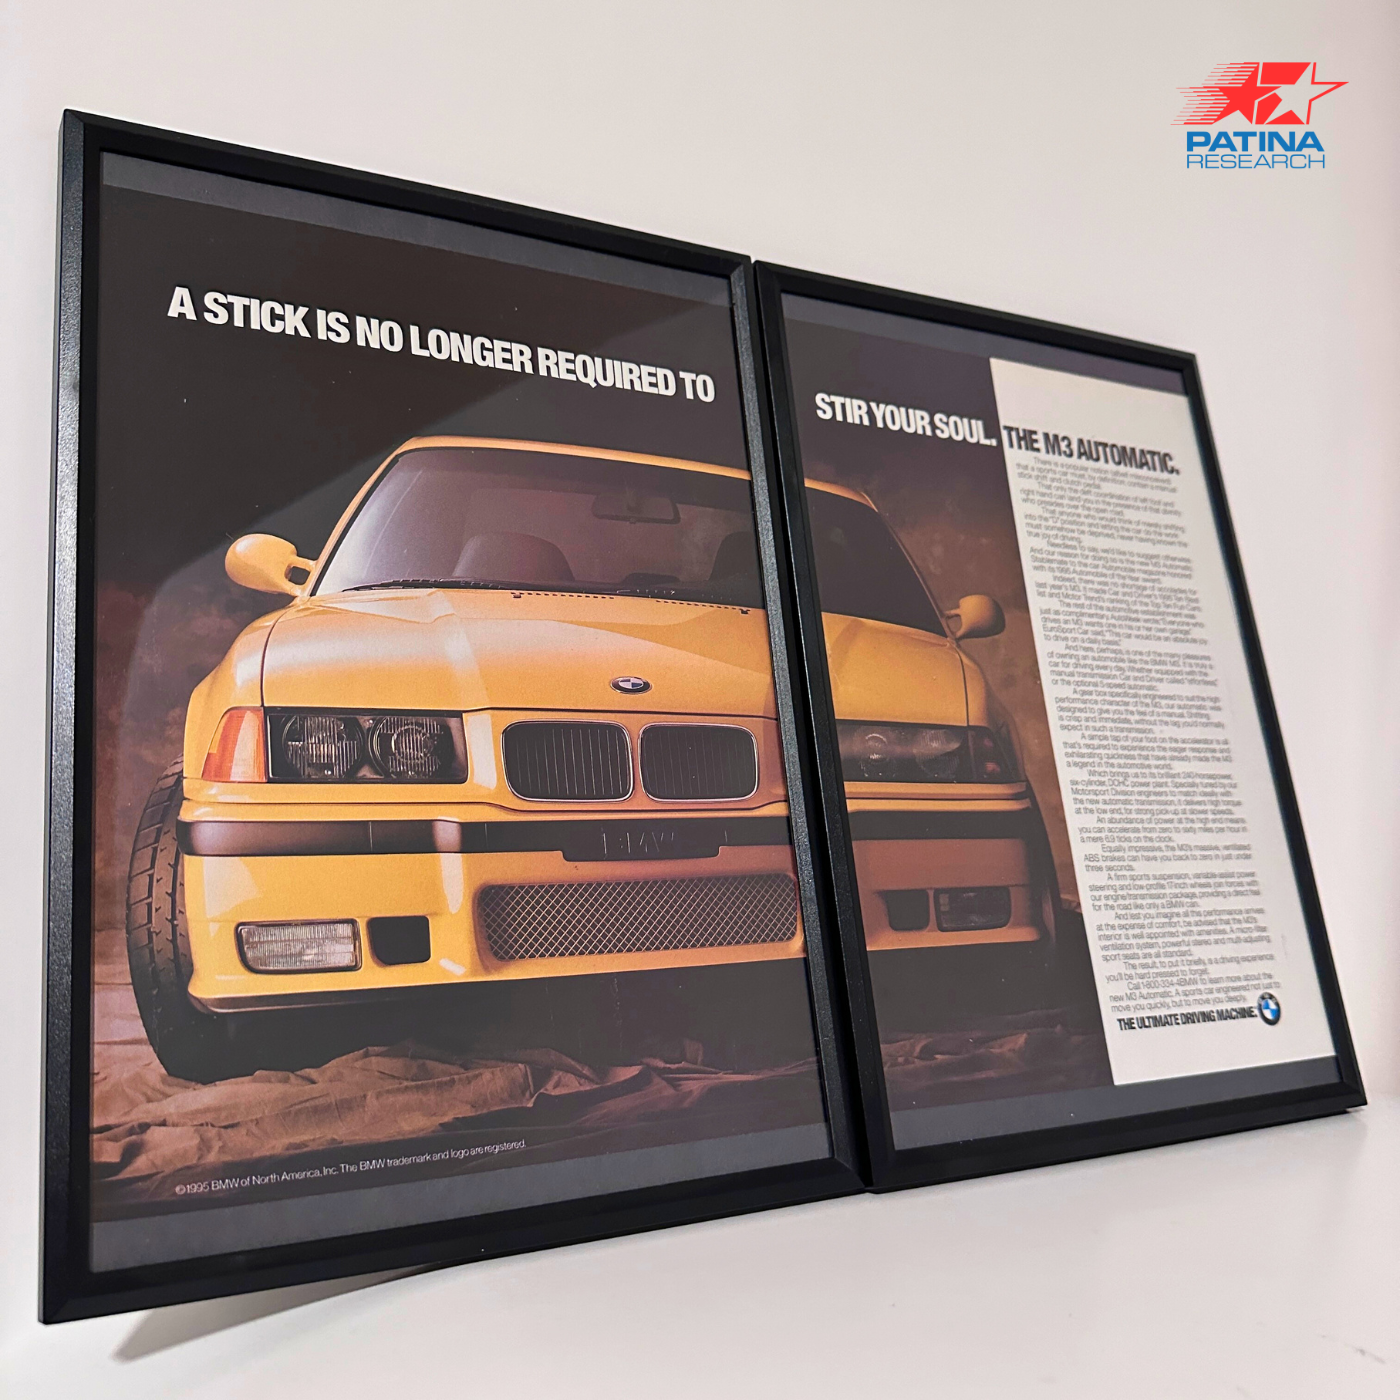 BMW m3 a stick is no longer required framed ad